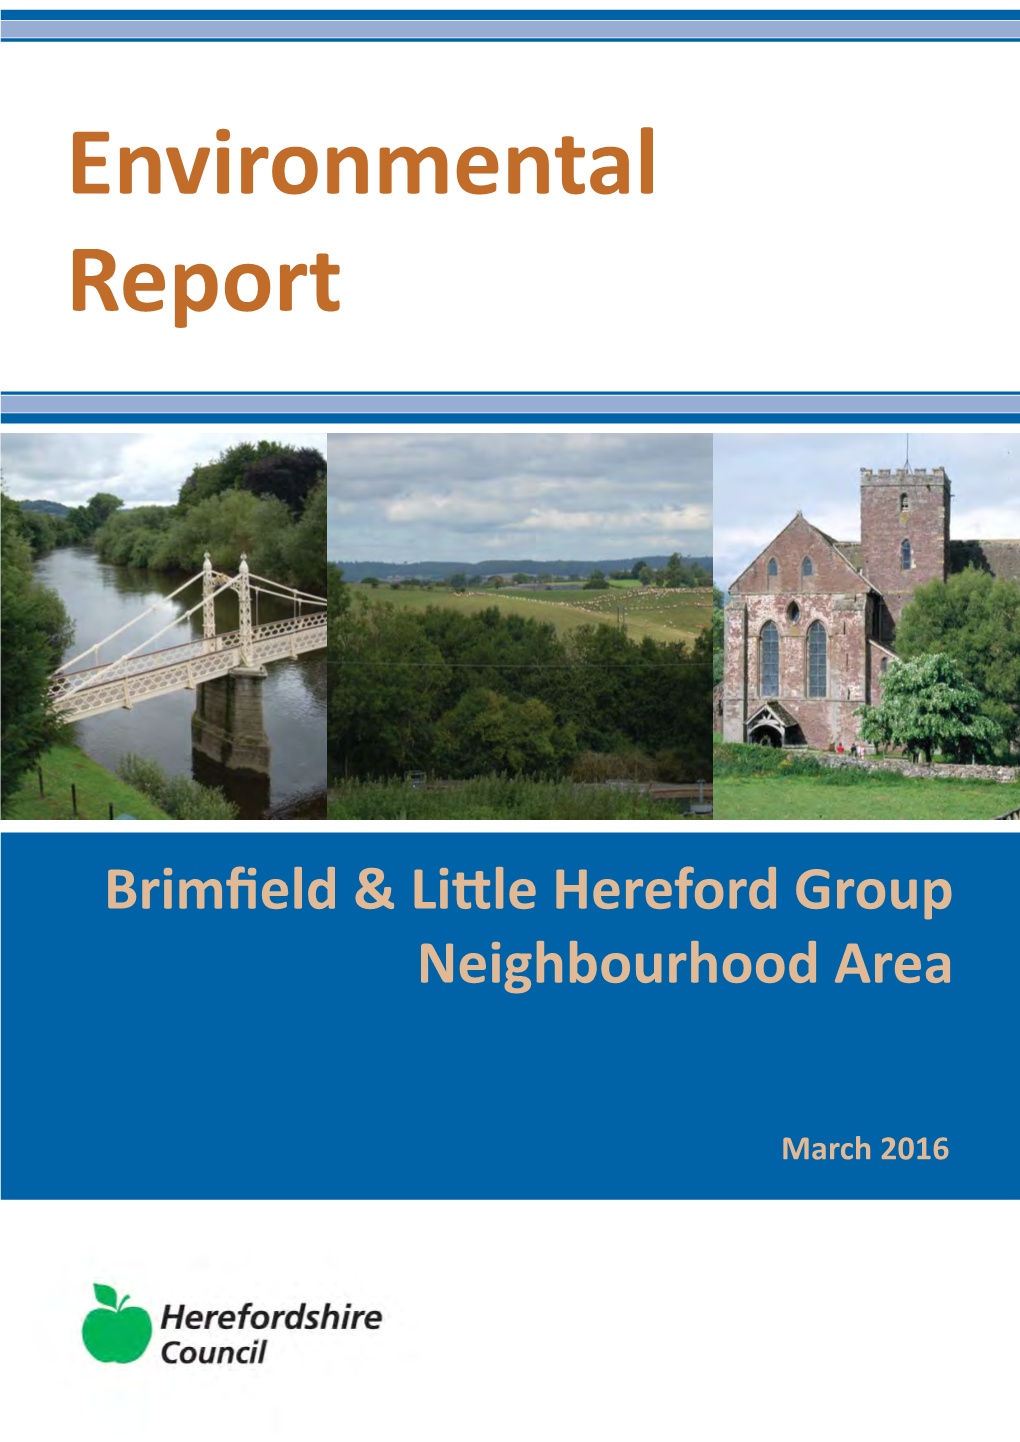 Brimfield and Little Hereford Environmental Report March 2016